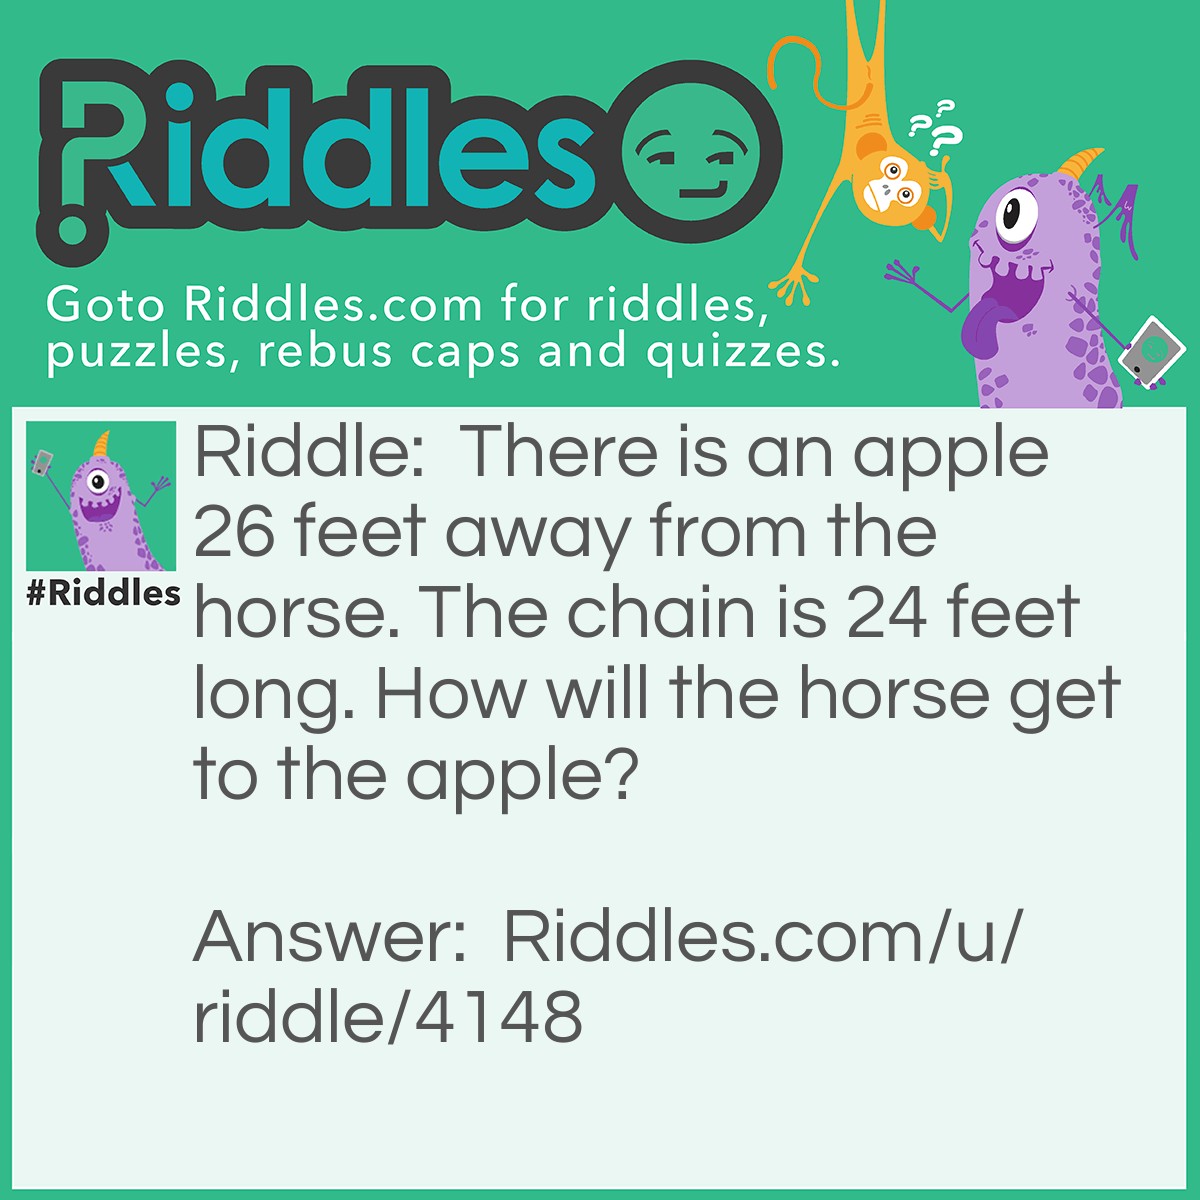 Riddle: There is an apple 26 feet away from the horse. The chain is 24 feet long. How will the horse get to the apple? Answer: Easy, just walk there. The chain isn't tied to anything.